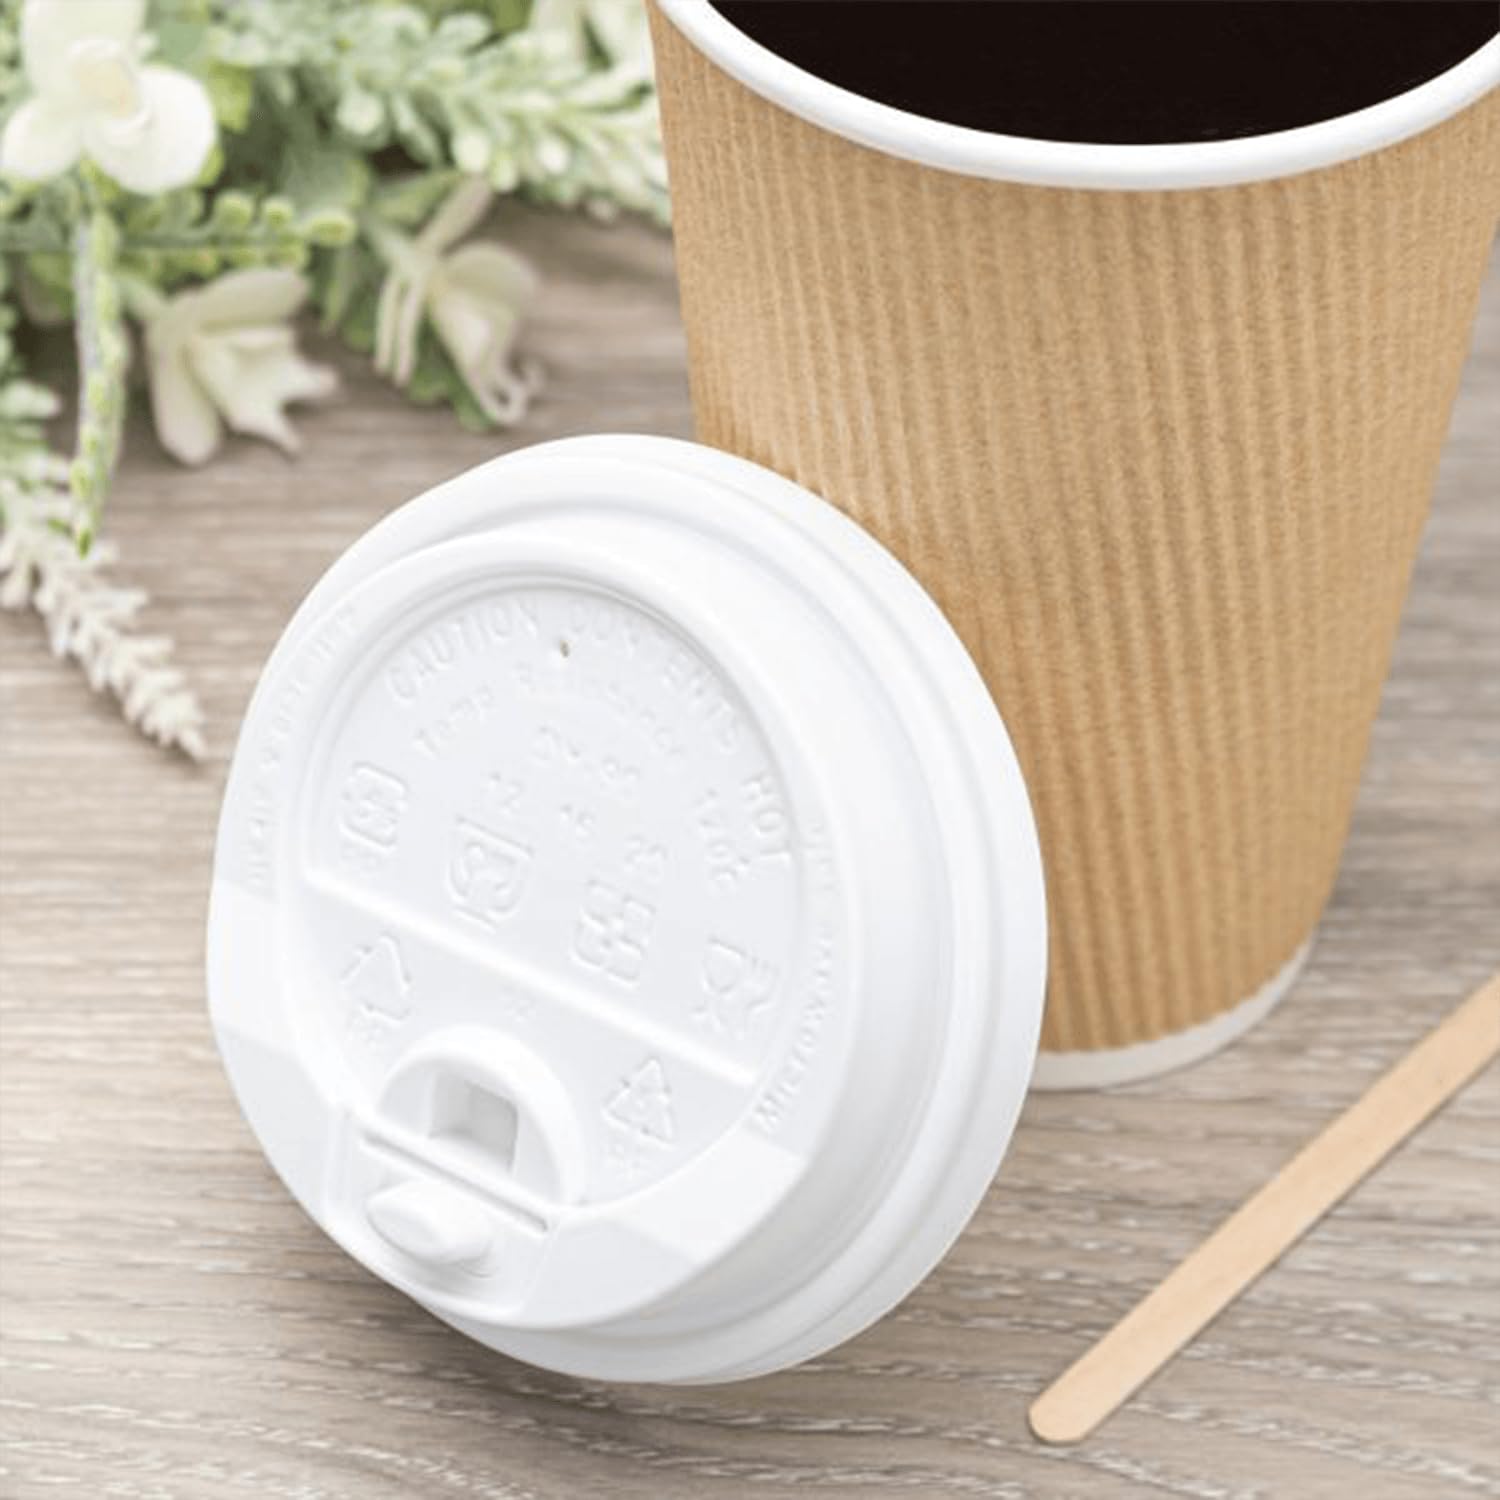 https://www.tuobopackaging.com/pla-degradable-paper-cup/